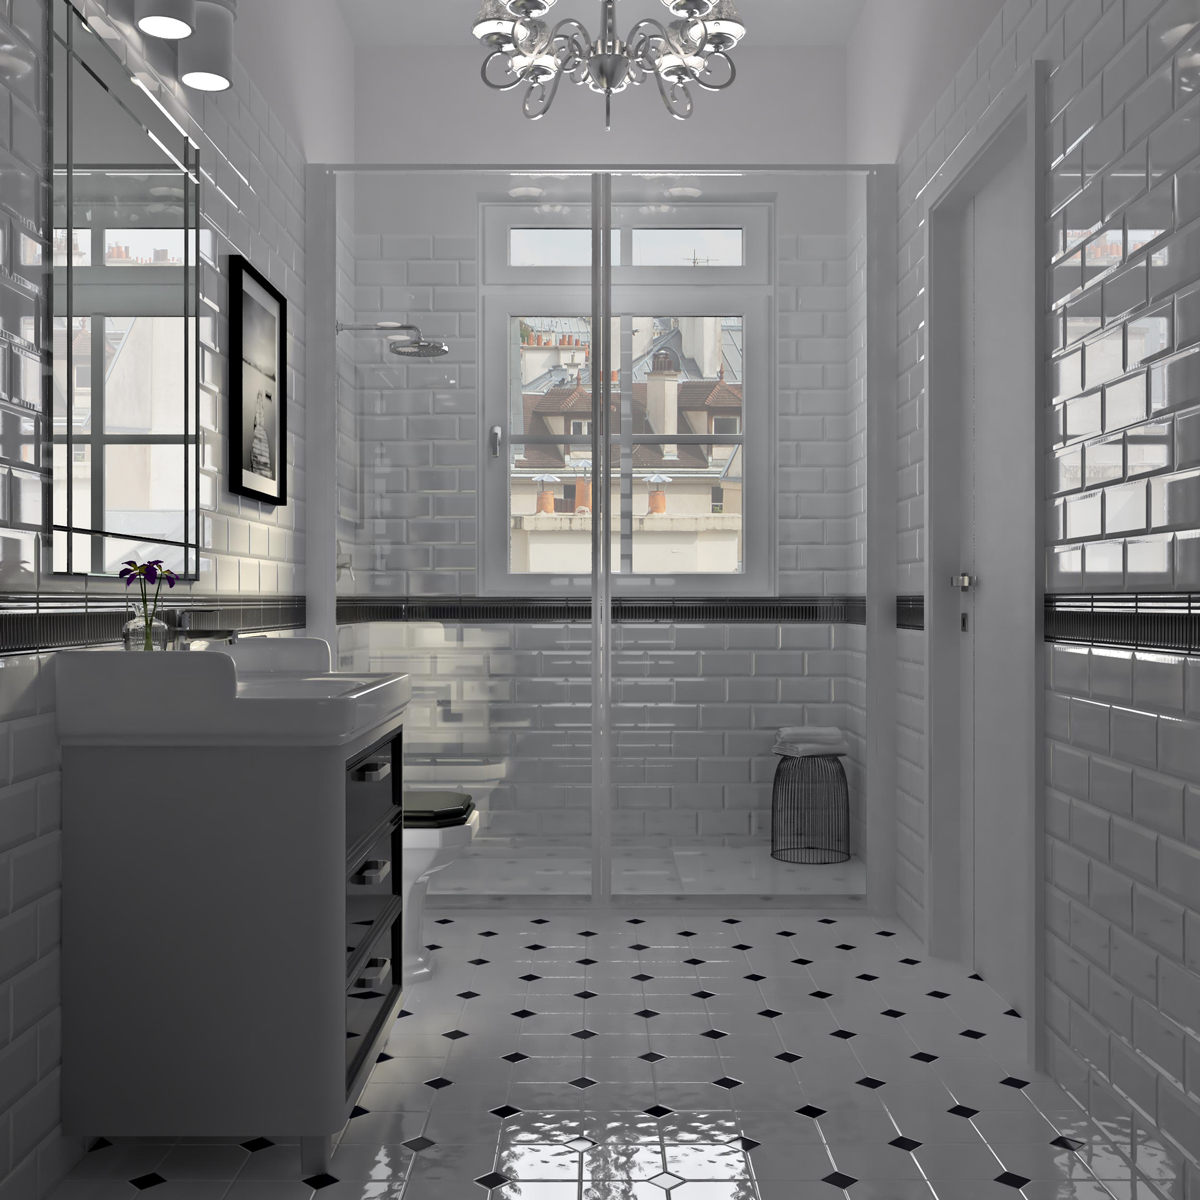 How to Create a Traditional-Style Bathroom - Product Guides and